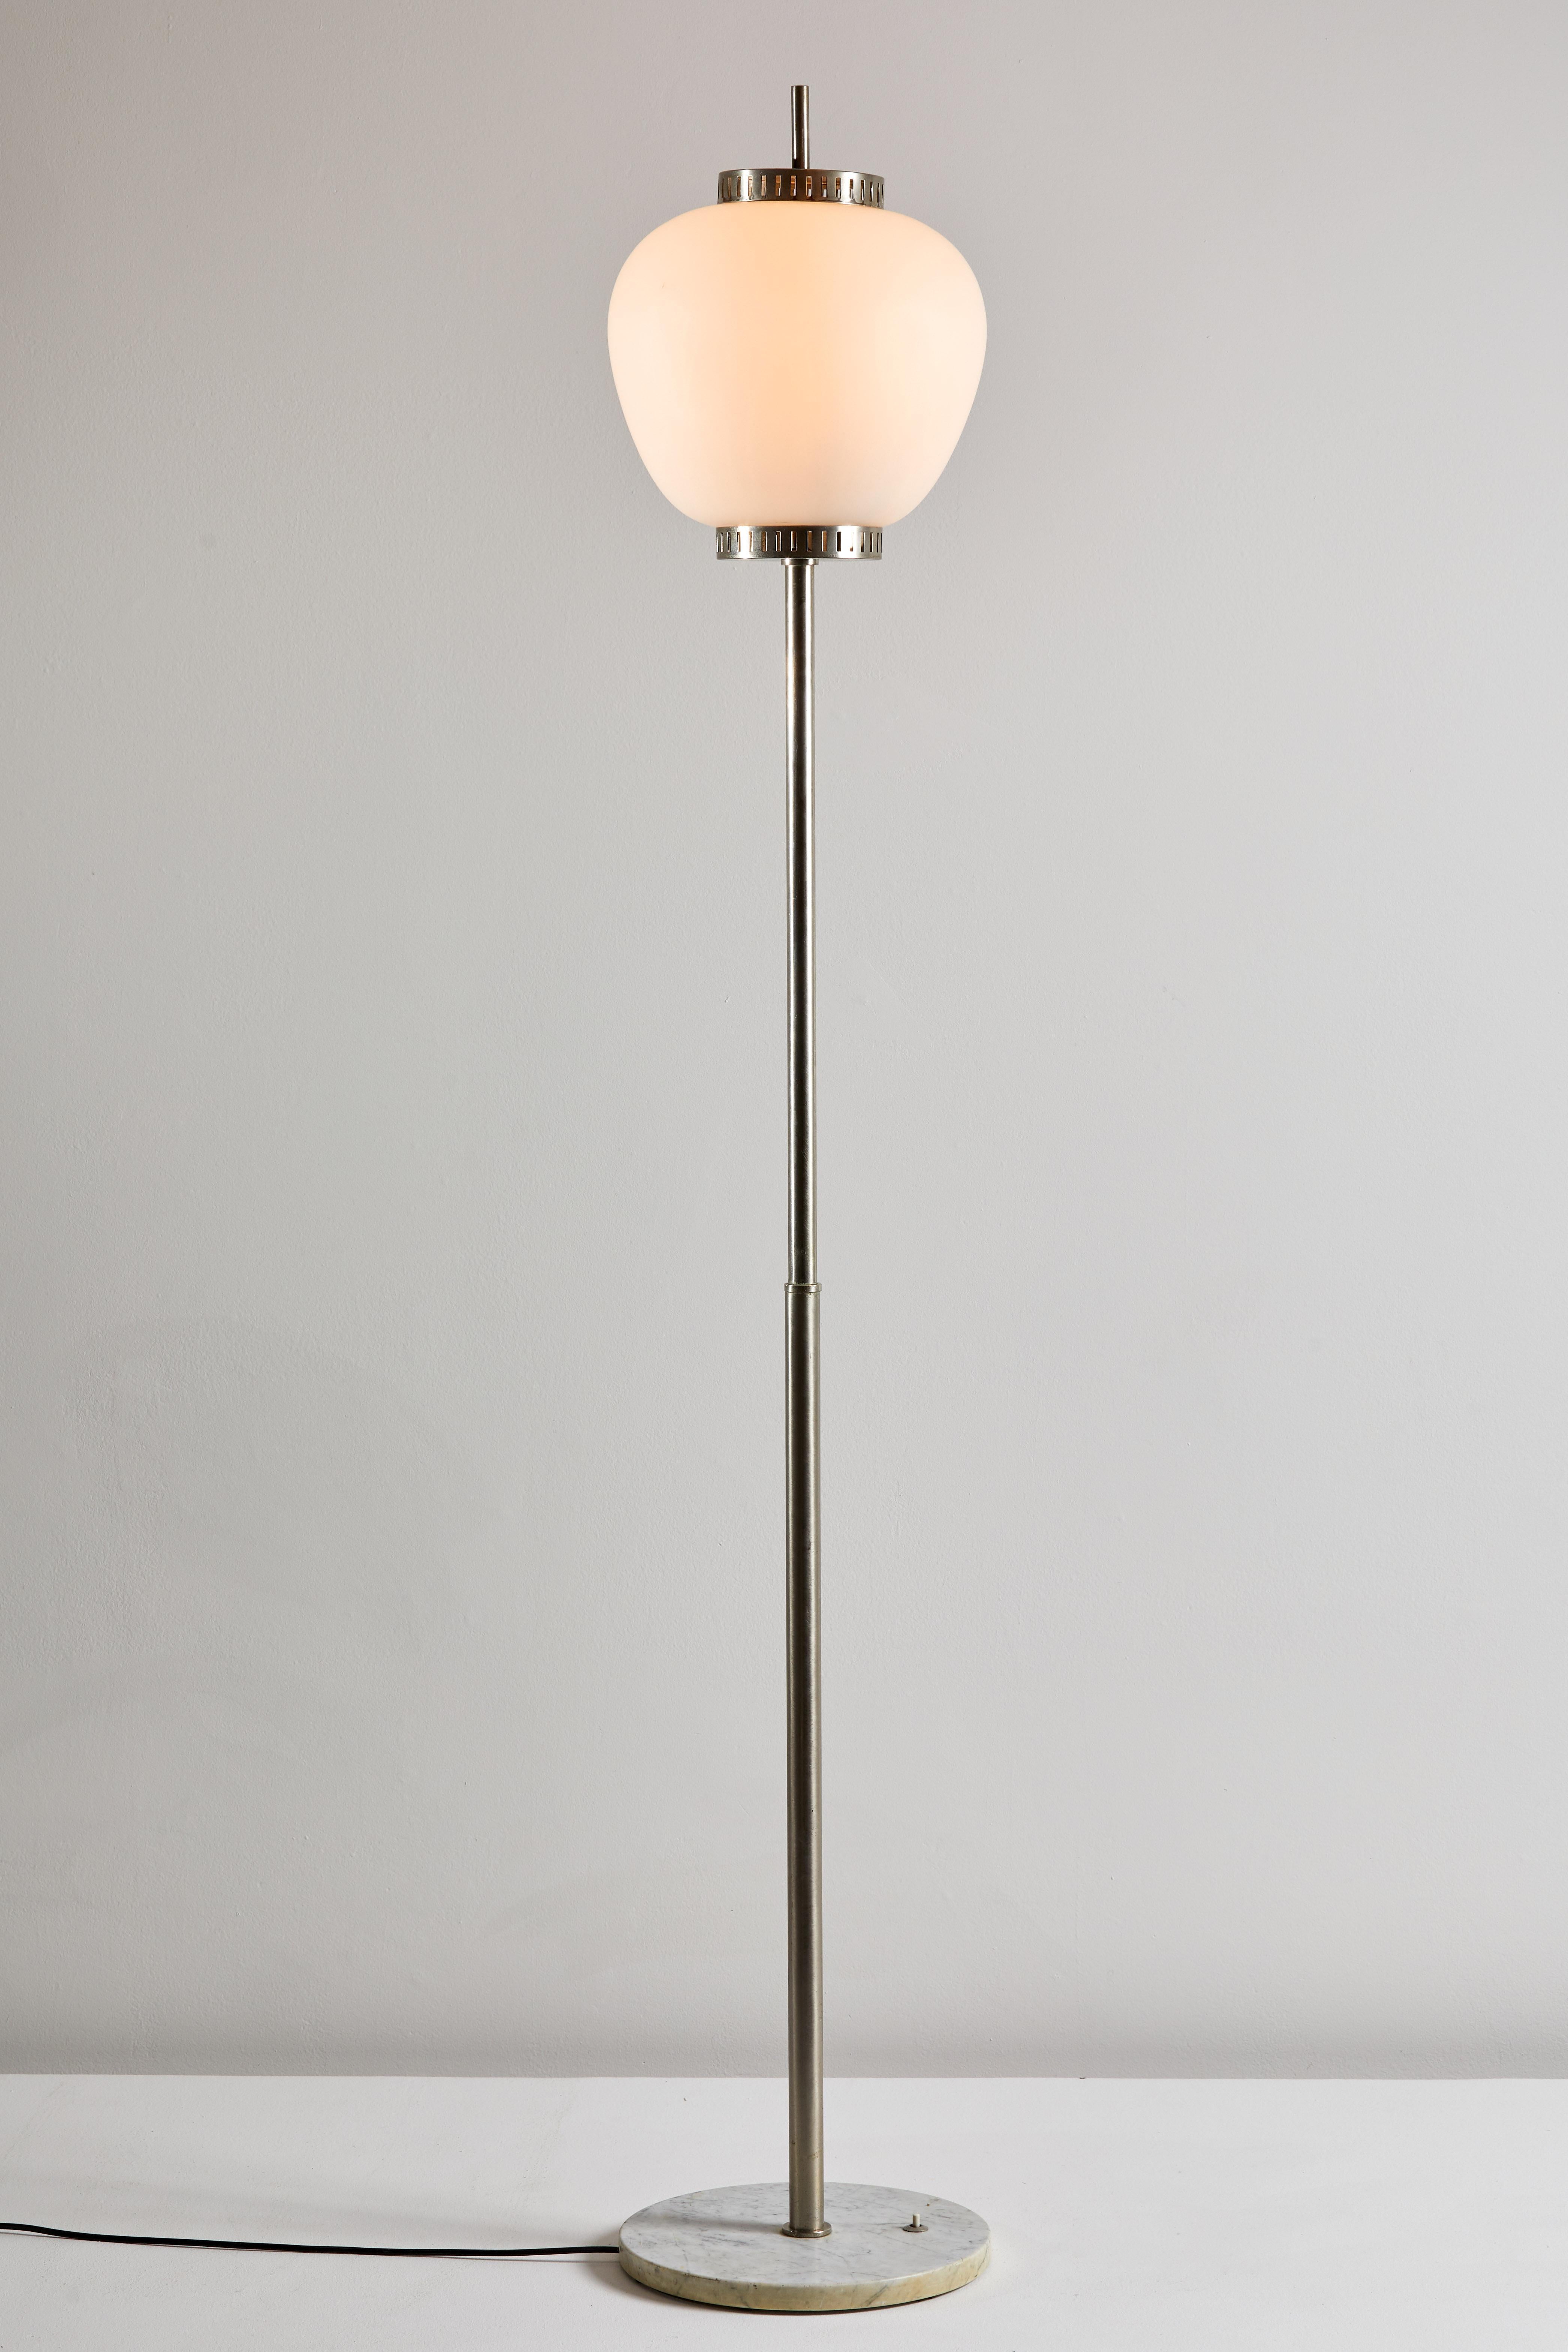 Floor lamp by Stilnovo. Manufactured in Italy, circa 1960s. Marble base, chrome-plated brass hardware, brushed satin glass diffuser. Rewired for U.S. sockets. On/off switch on base. Takes two E27 100w maximum bulbs. Bulbs provided as a onetime